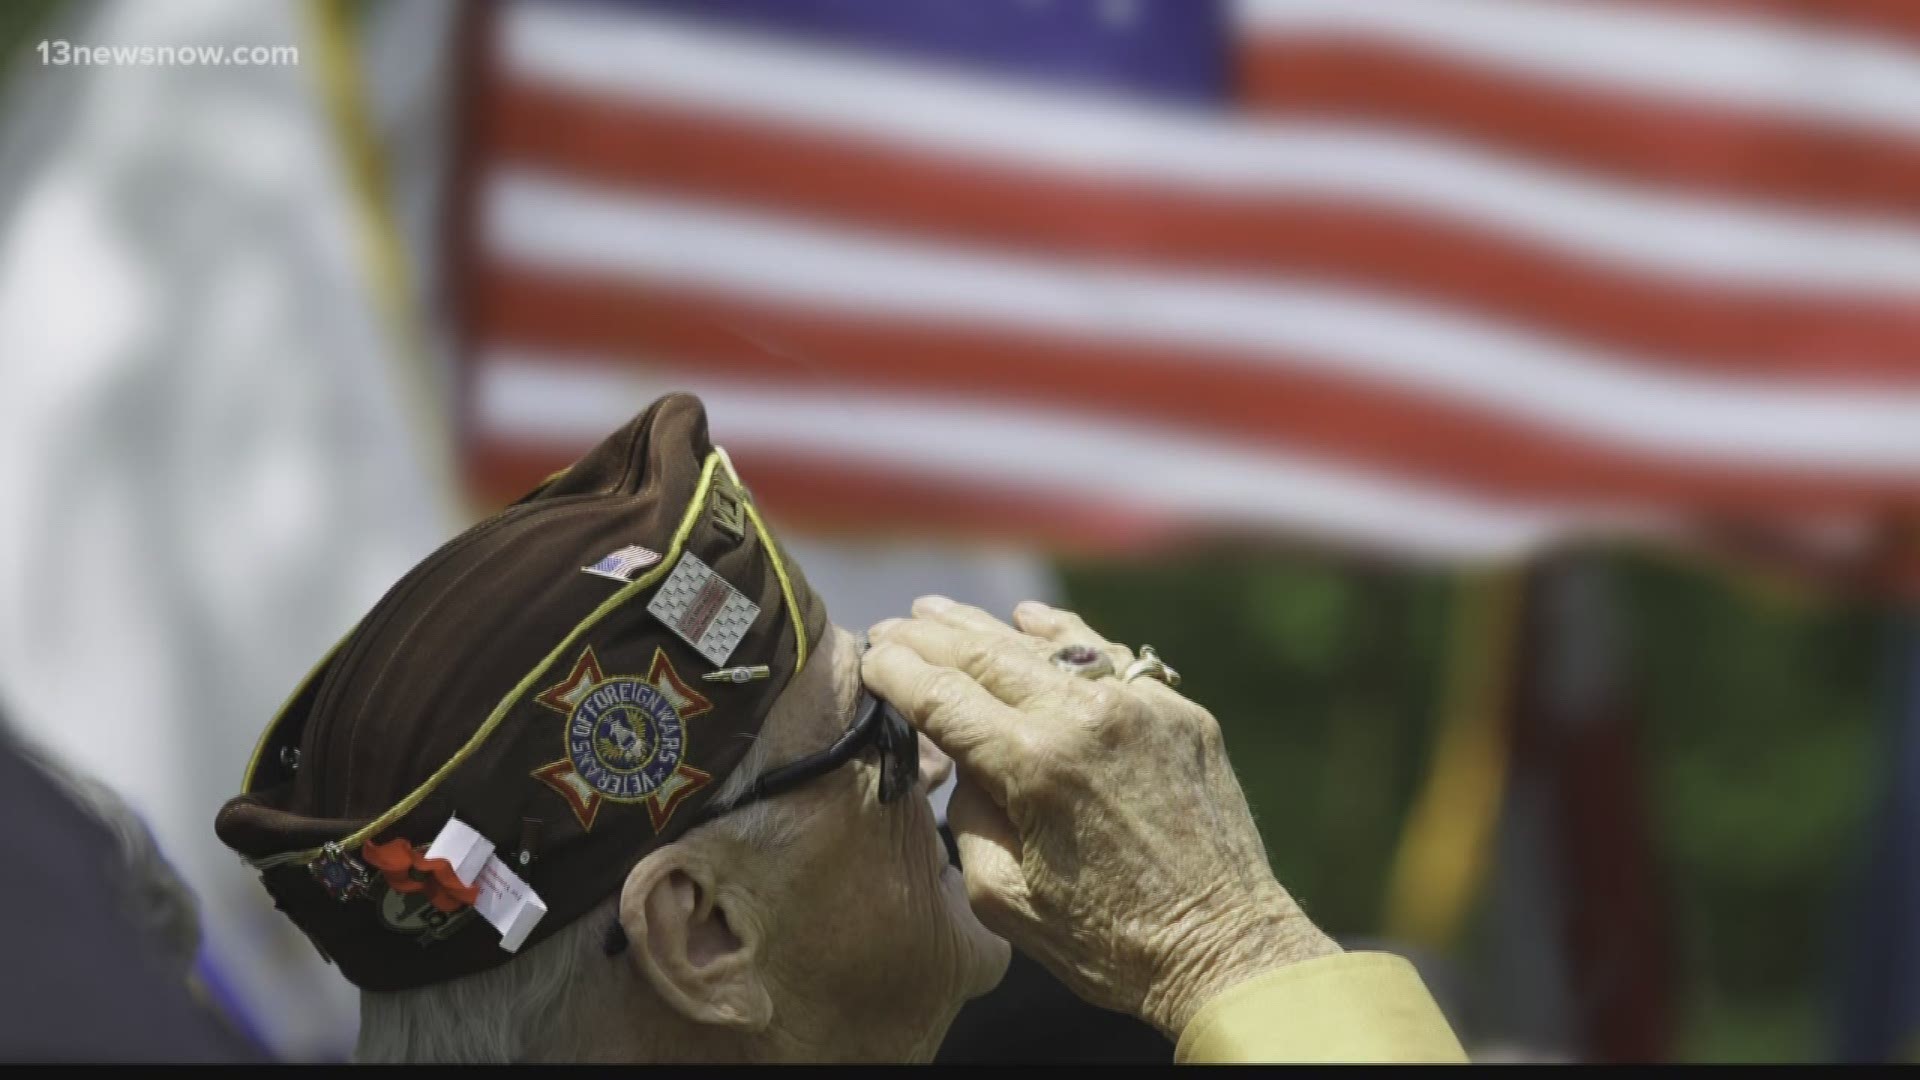 Some private sector organizations are joining forces to help military veterans.